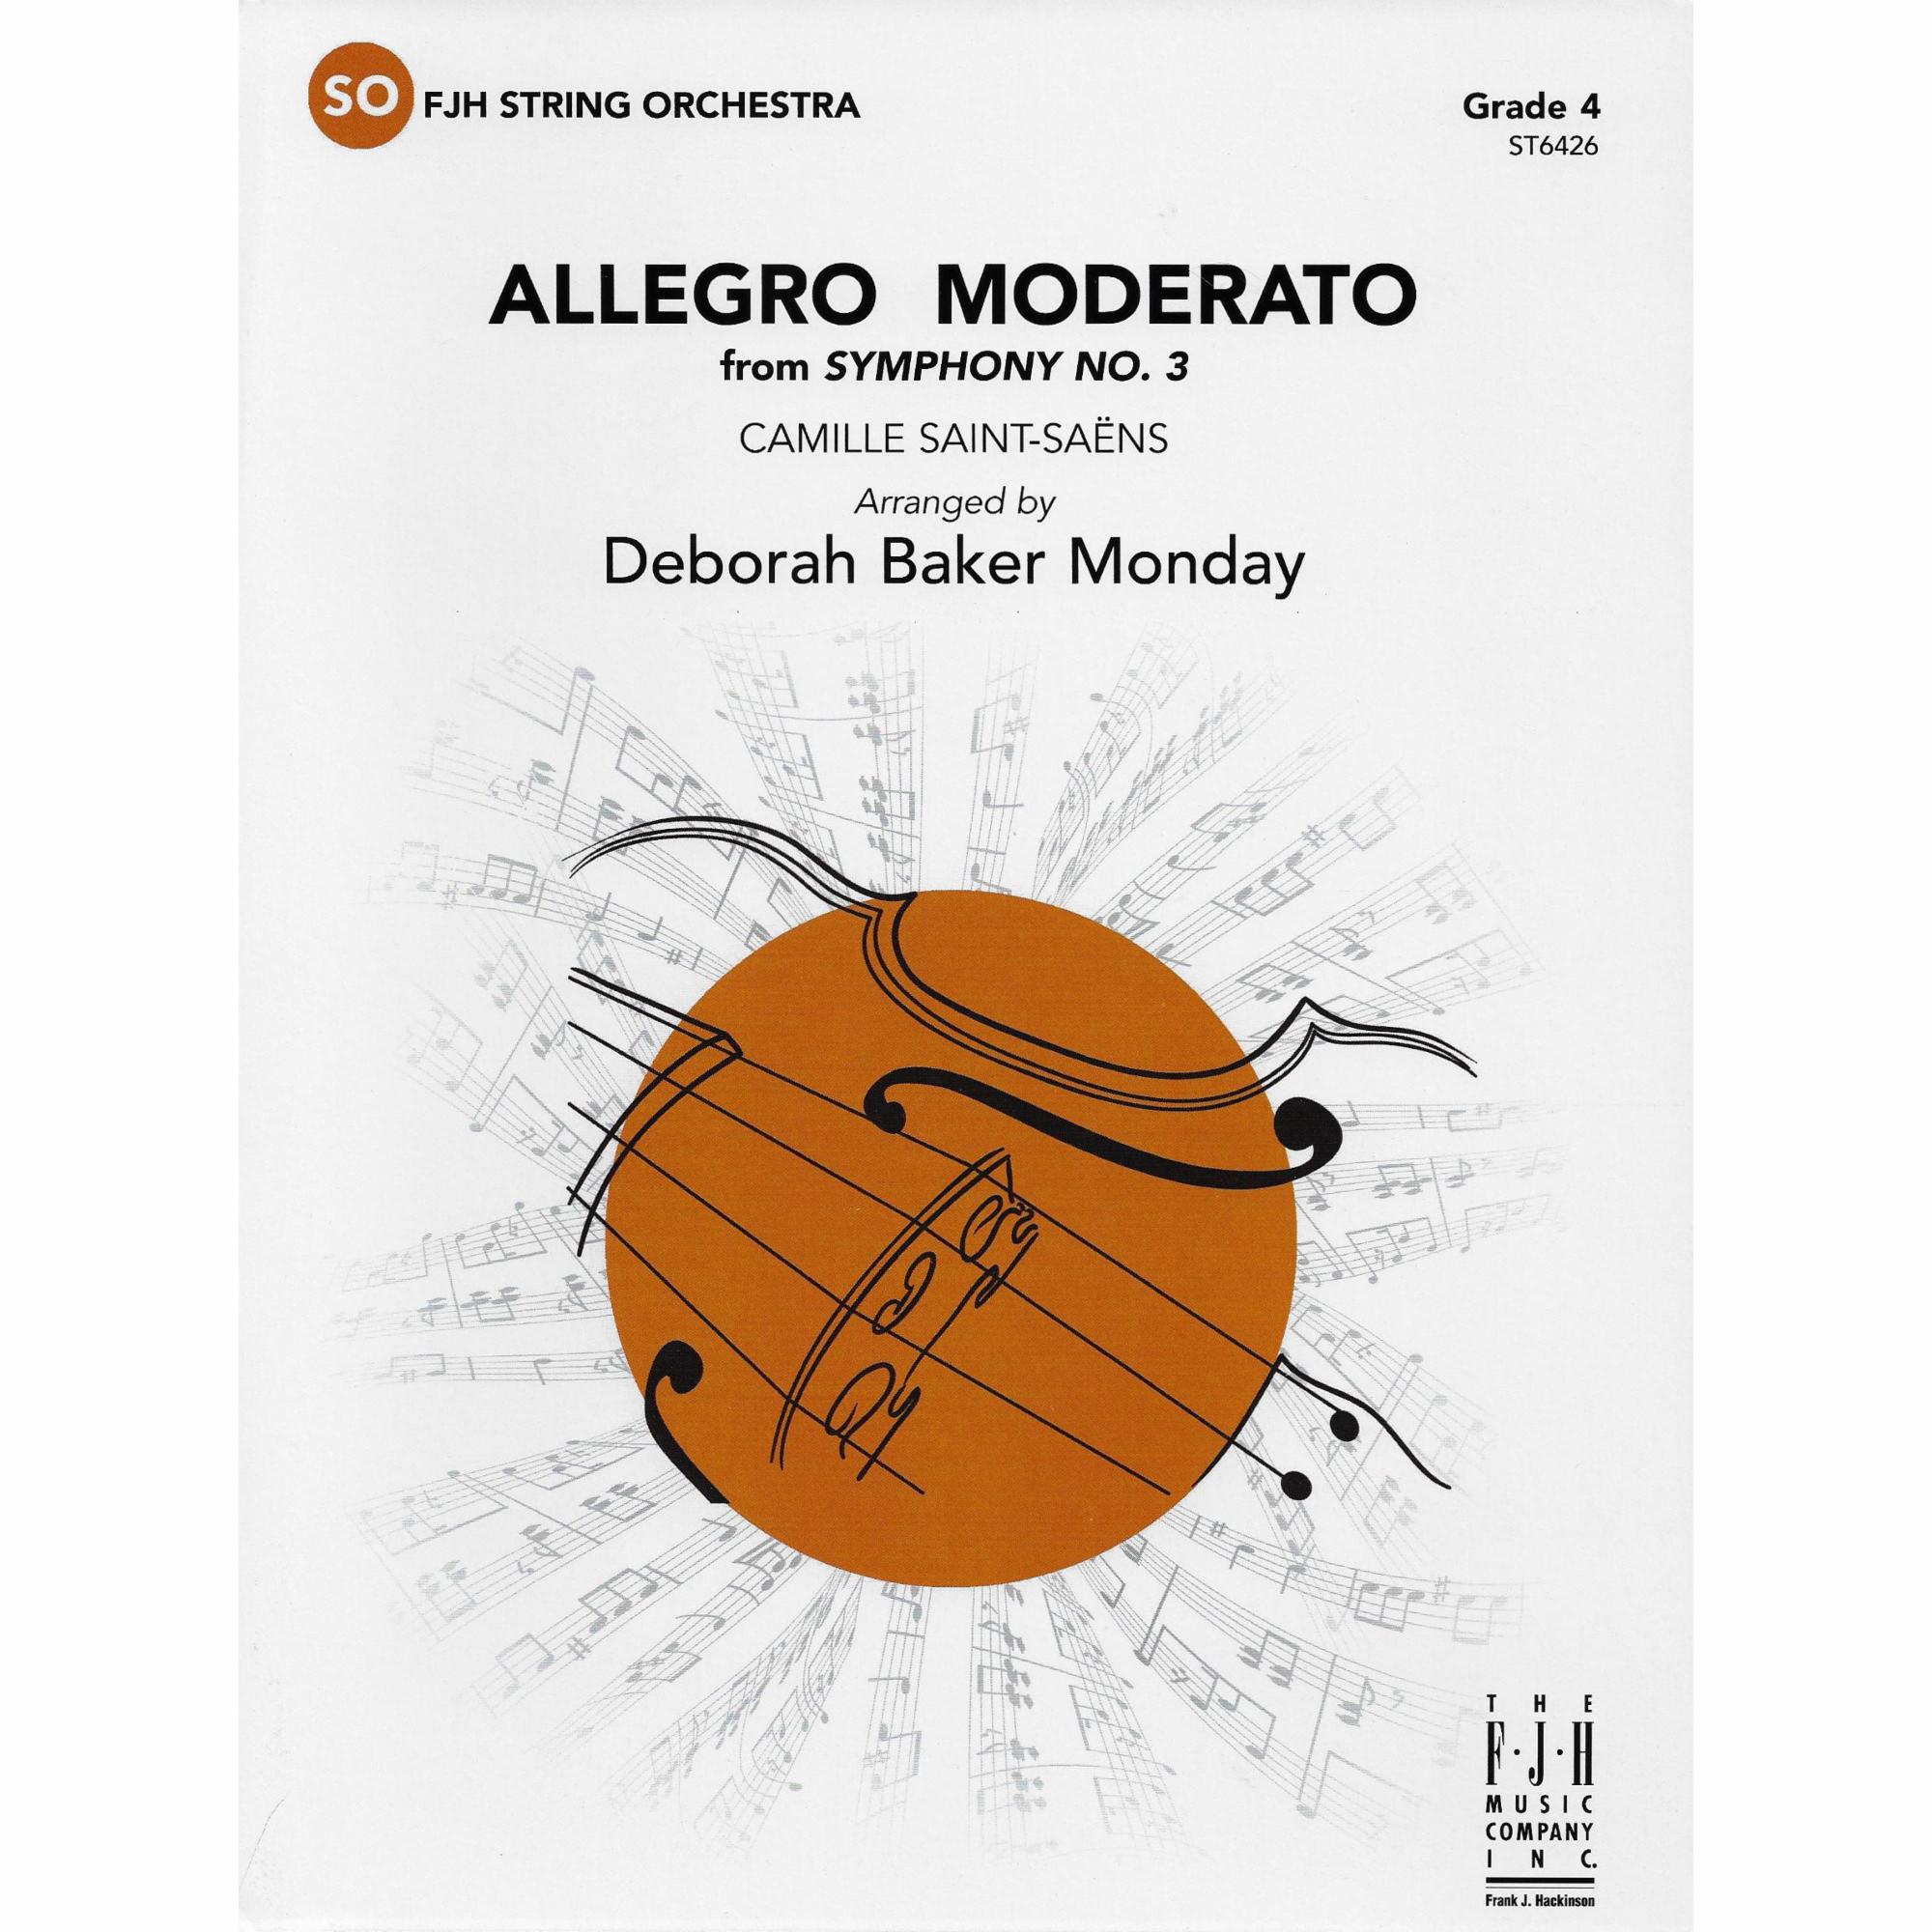 Allegro Moderato from Symphony No. 3 for String Orchestra